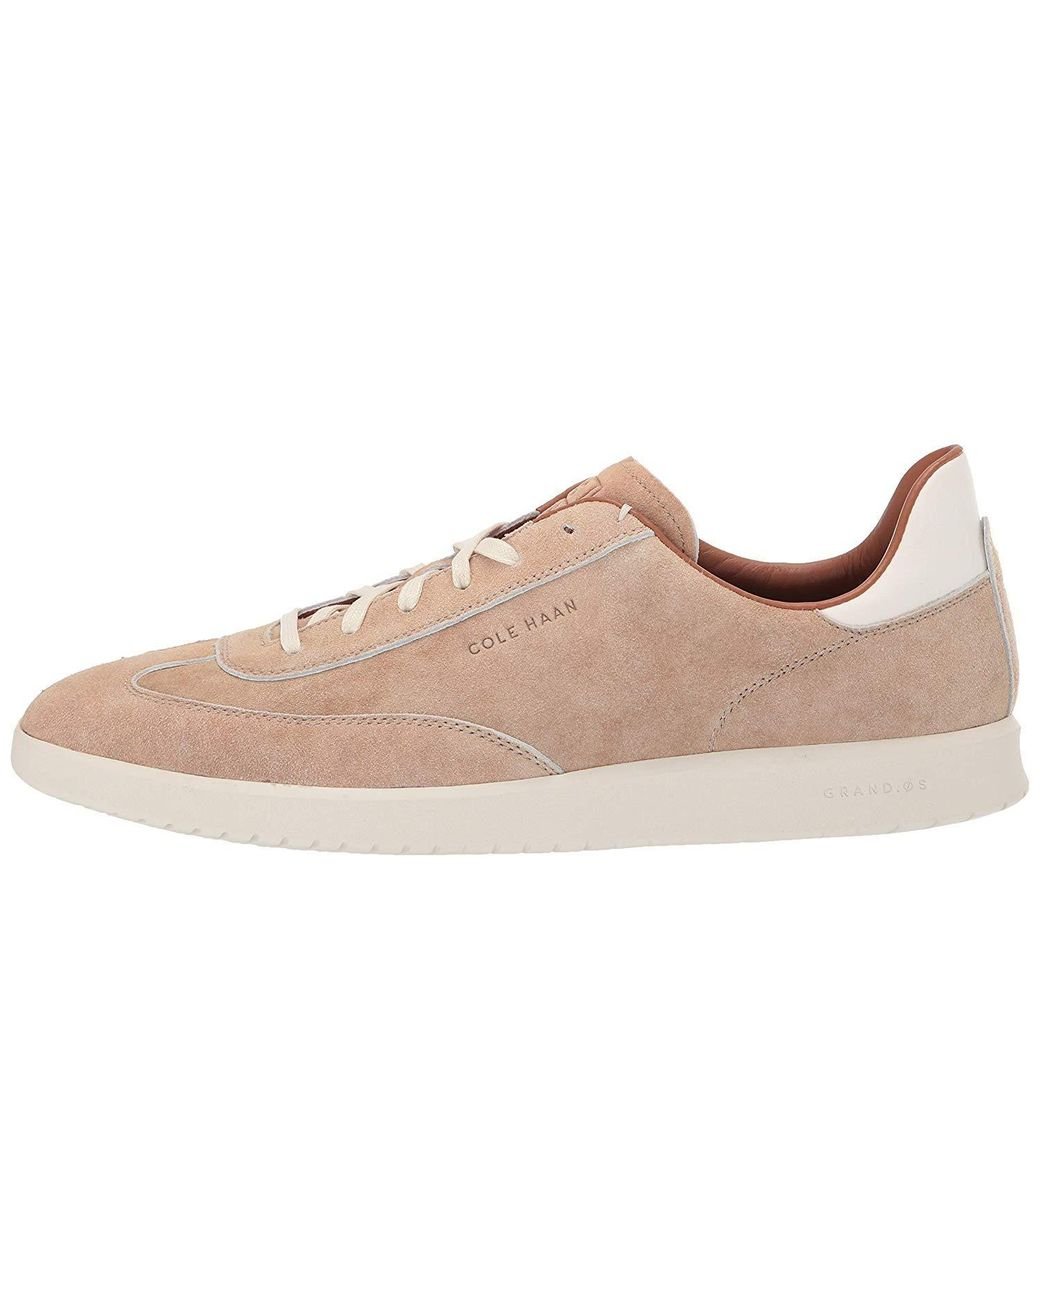 Cole Haan Leather Grandpro Turf Sneaker in Dusty Pink Suede (Pink) for ...